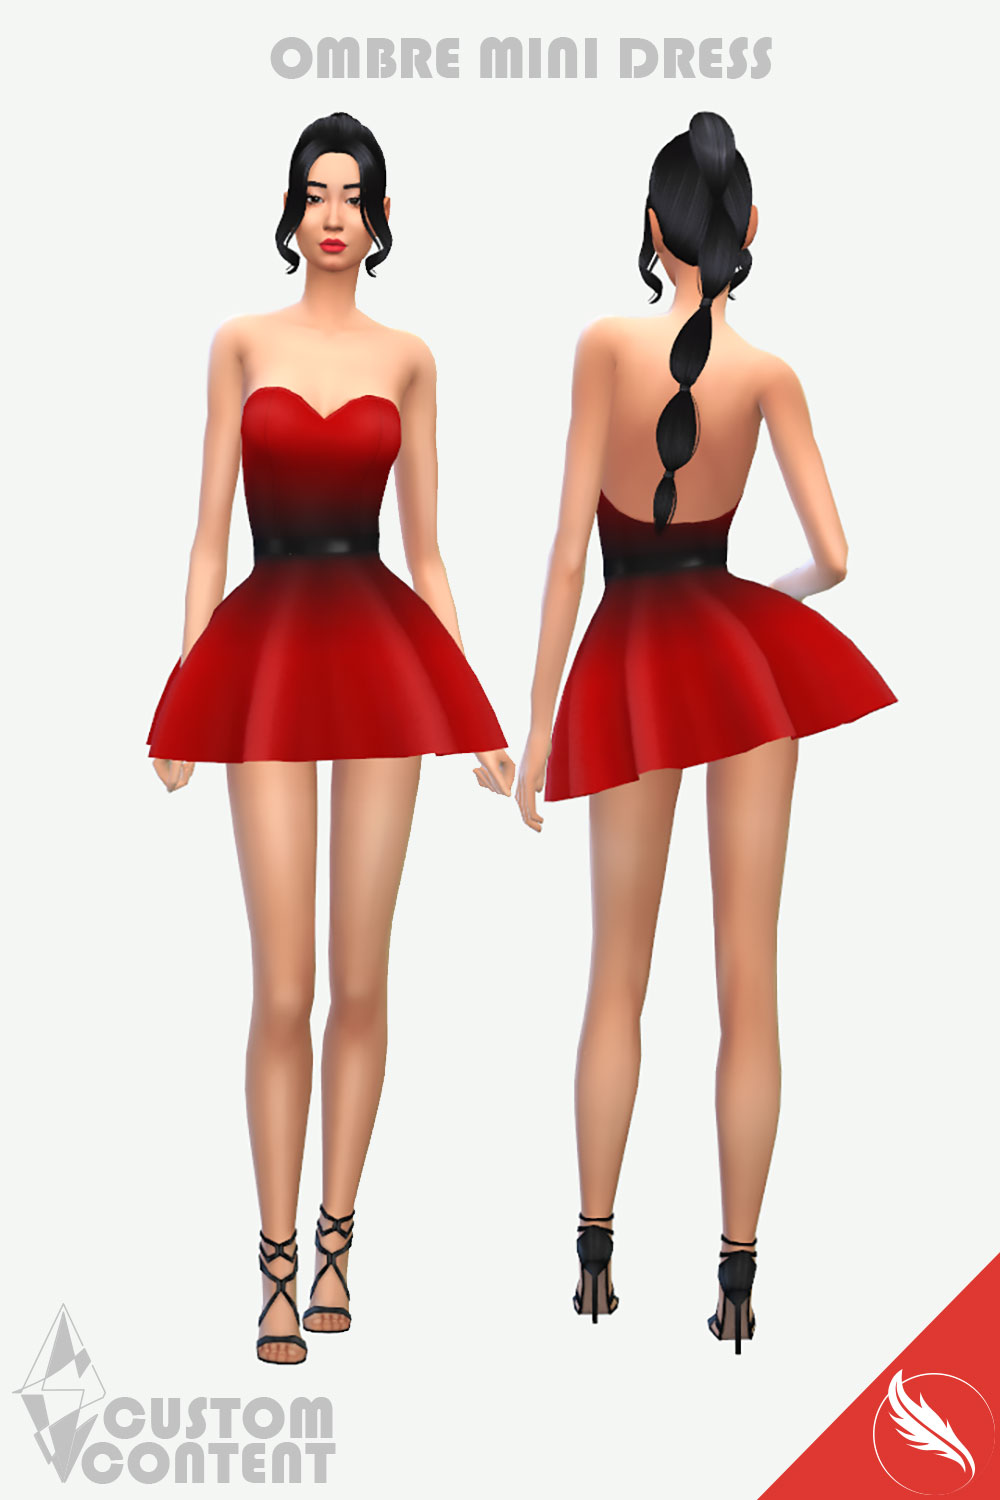 The Sims 4 Ombre Mini Strapless Dress